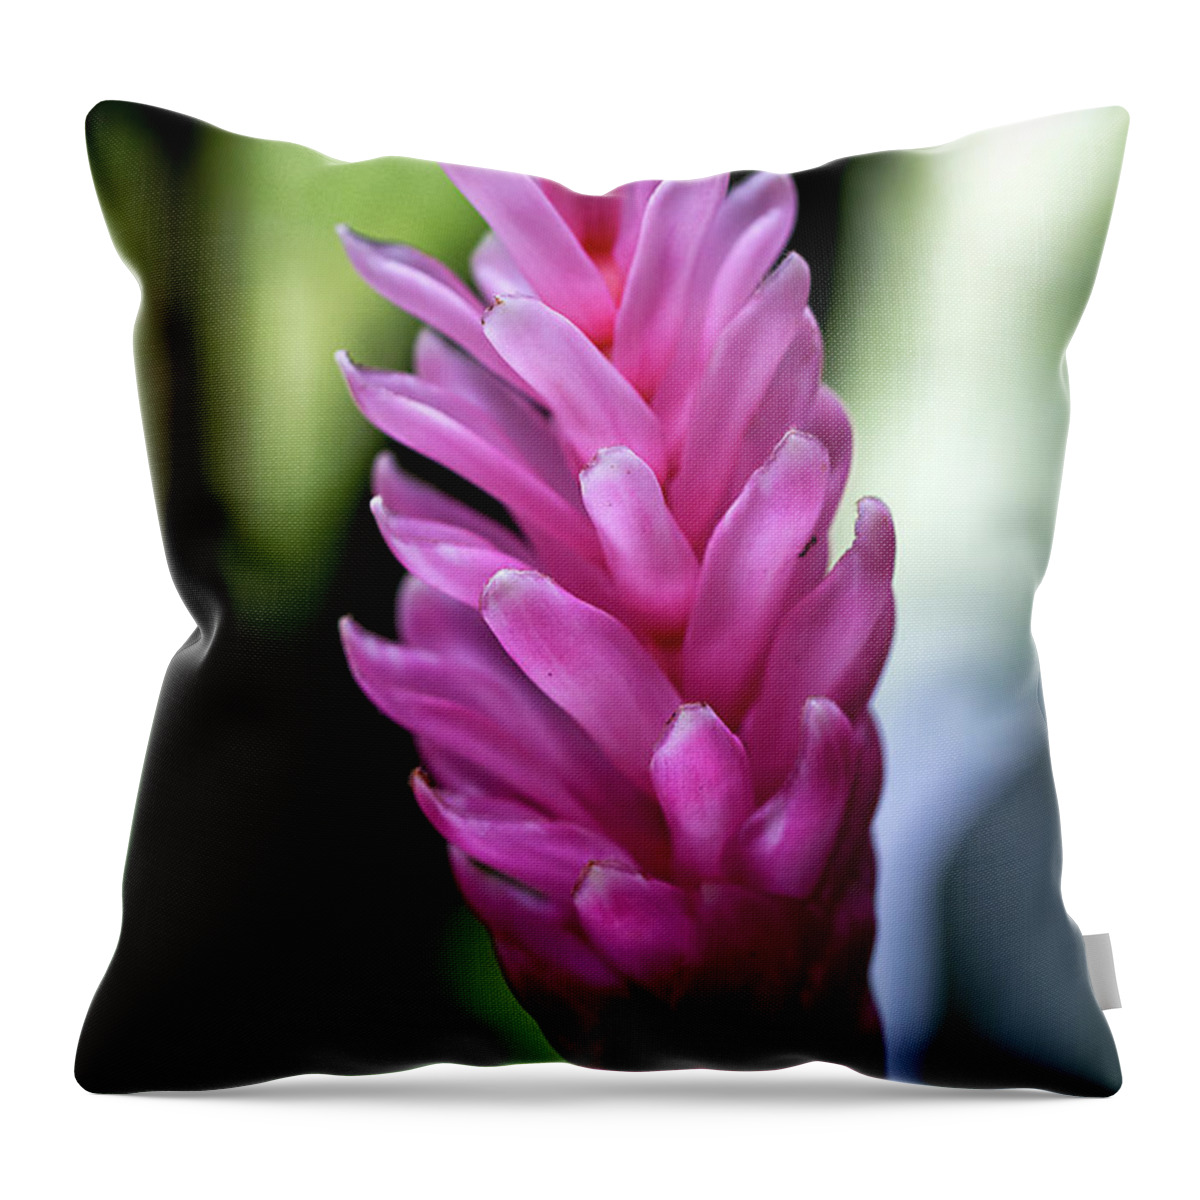 Granger Photography Throw Pillow featuring the photograph Lone Pink Ginger by Brad Granger